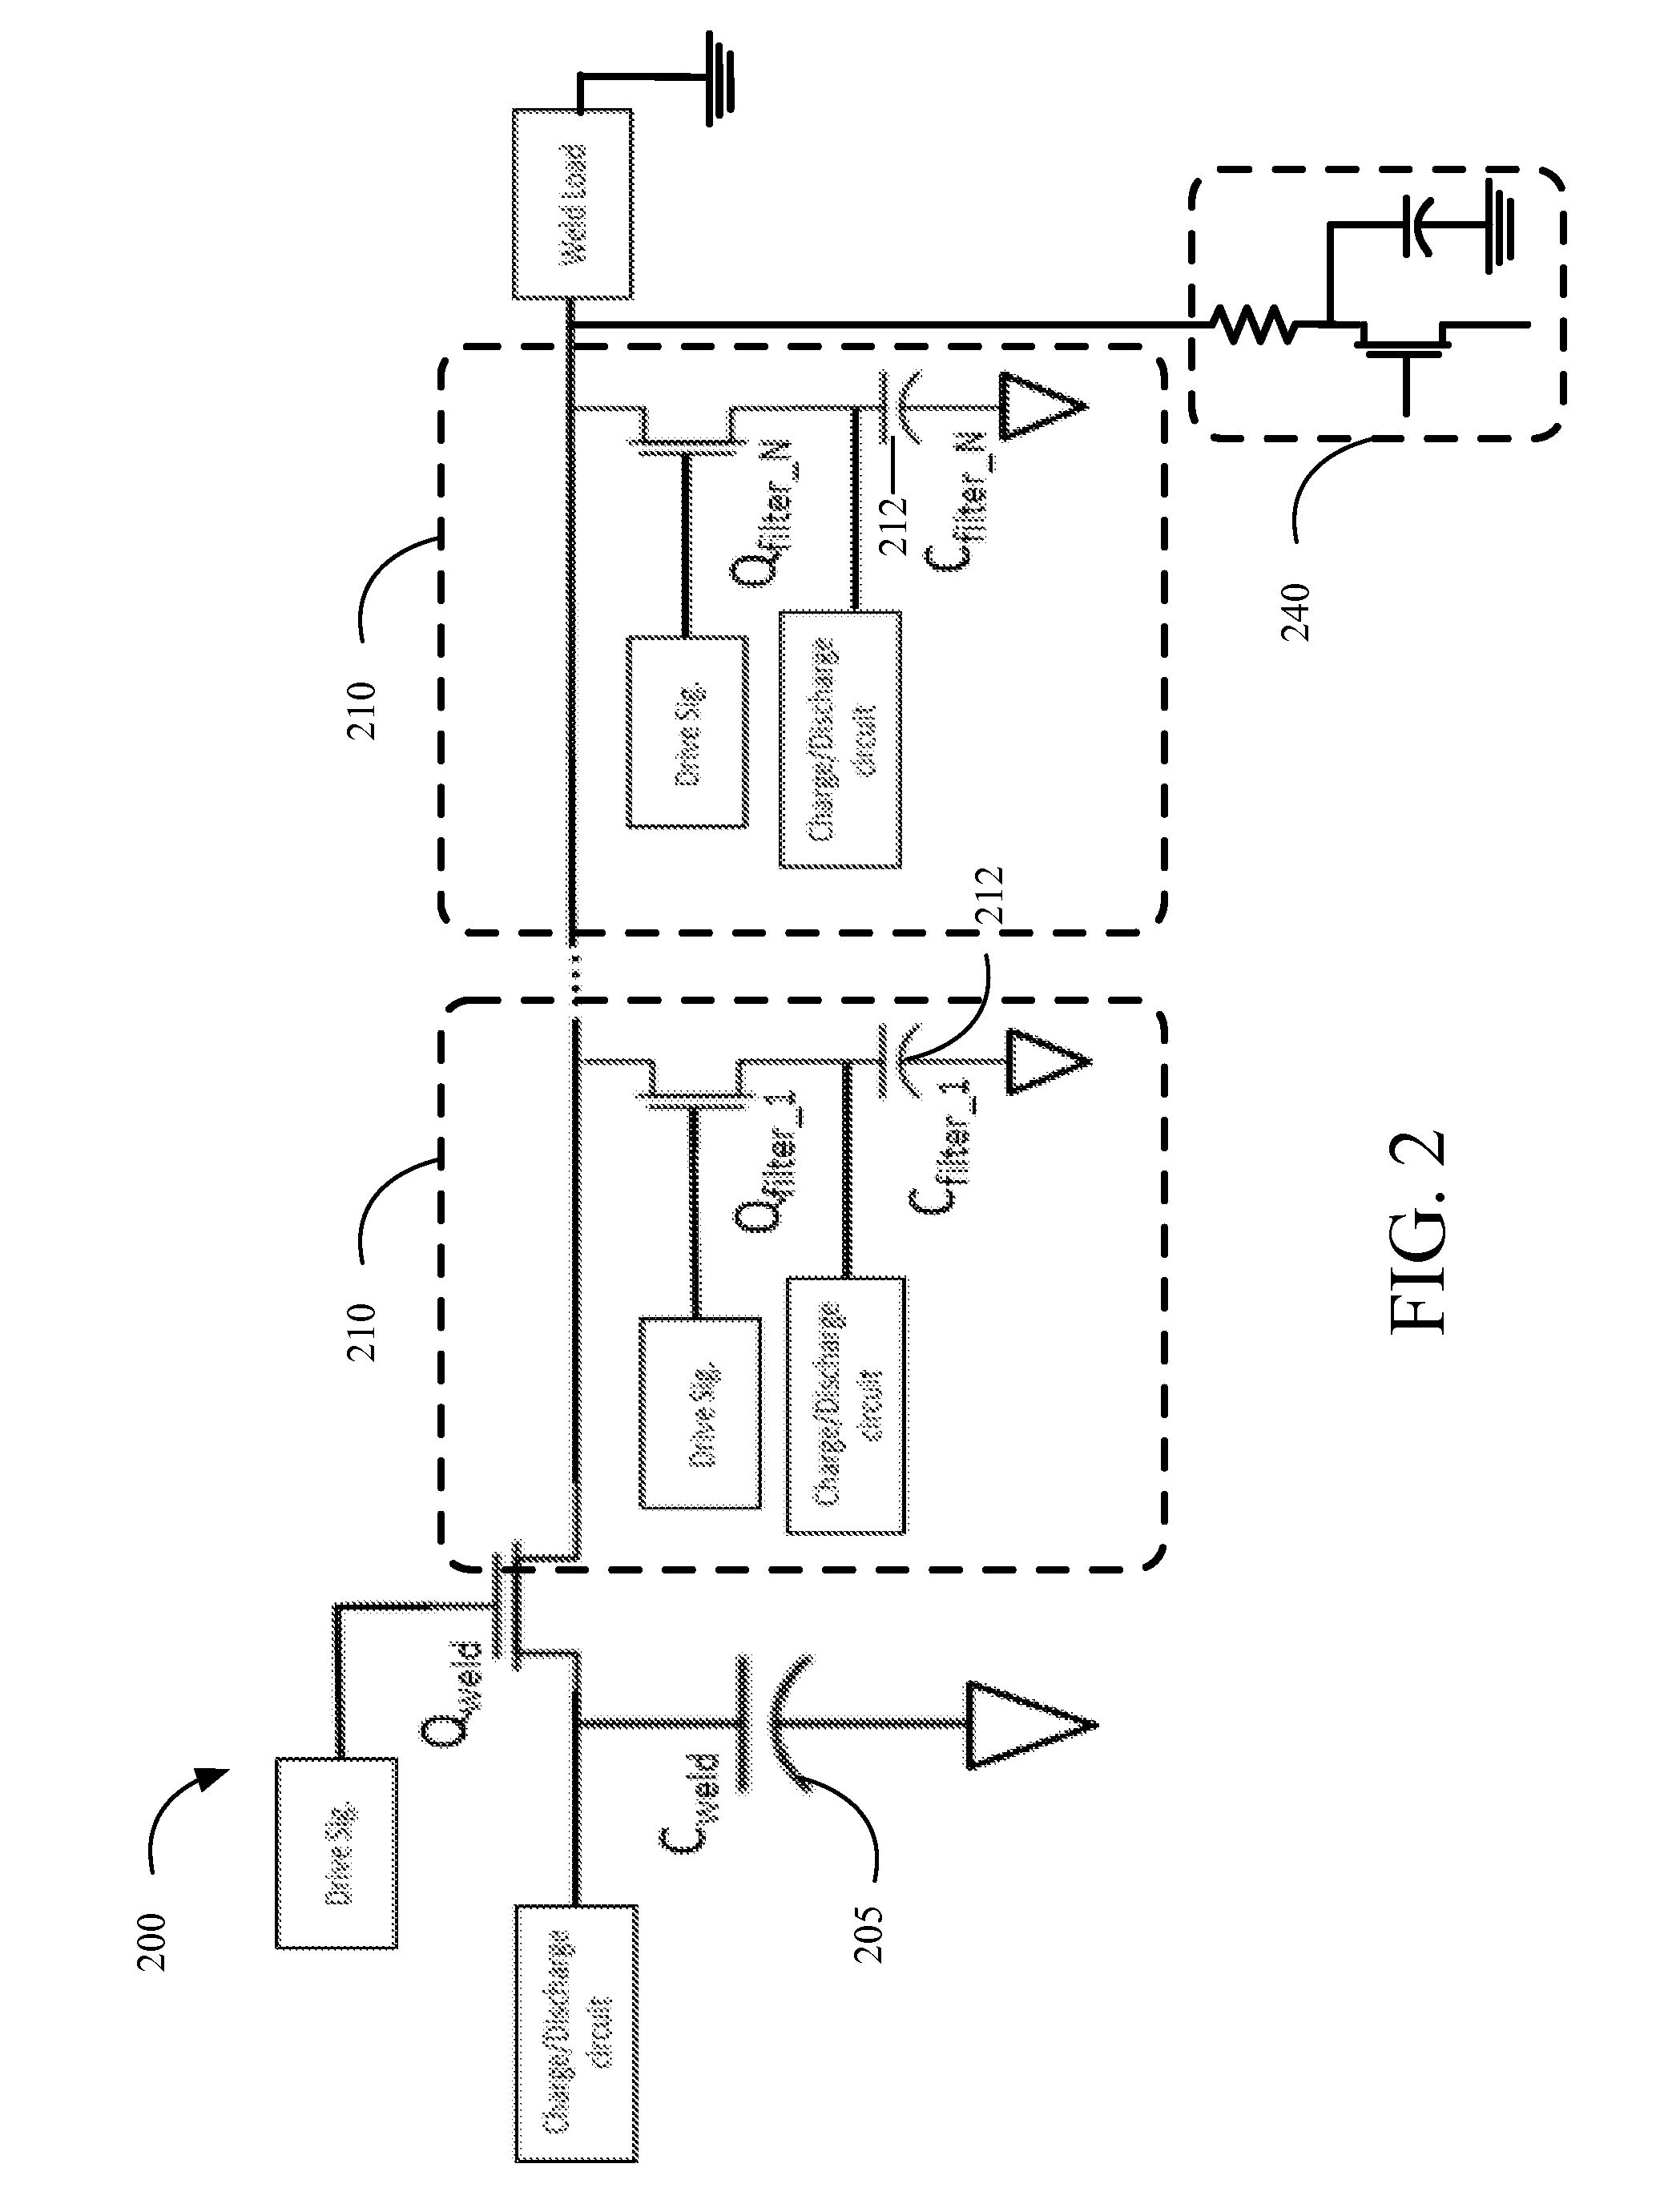 Welder With Active Linear DC Filtering Circuit